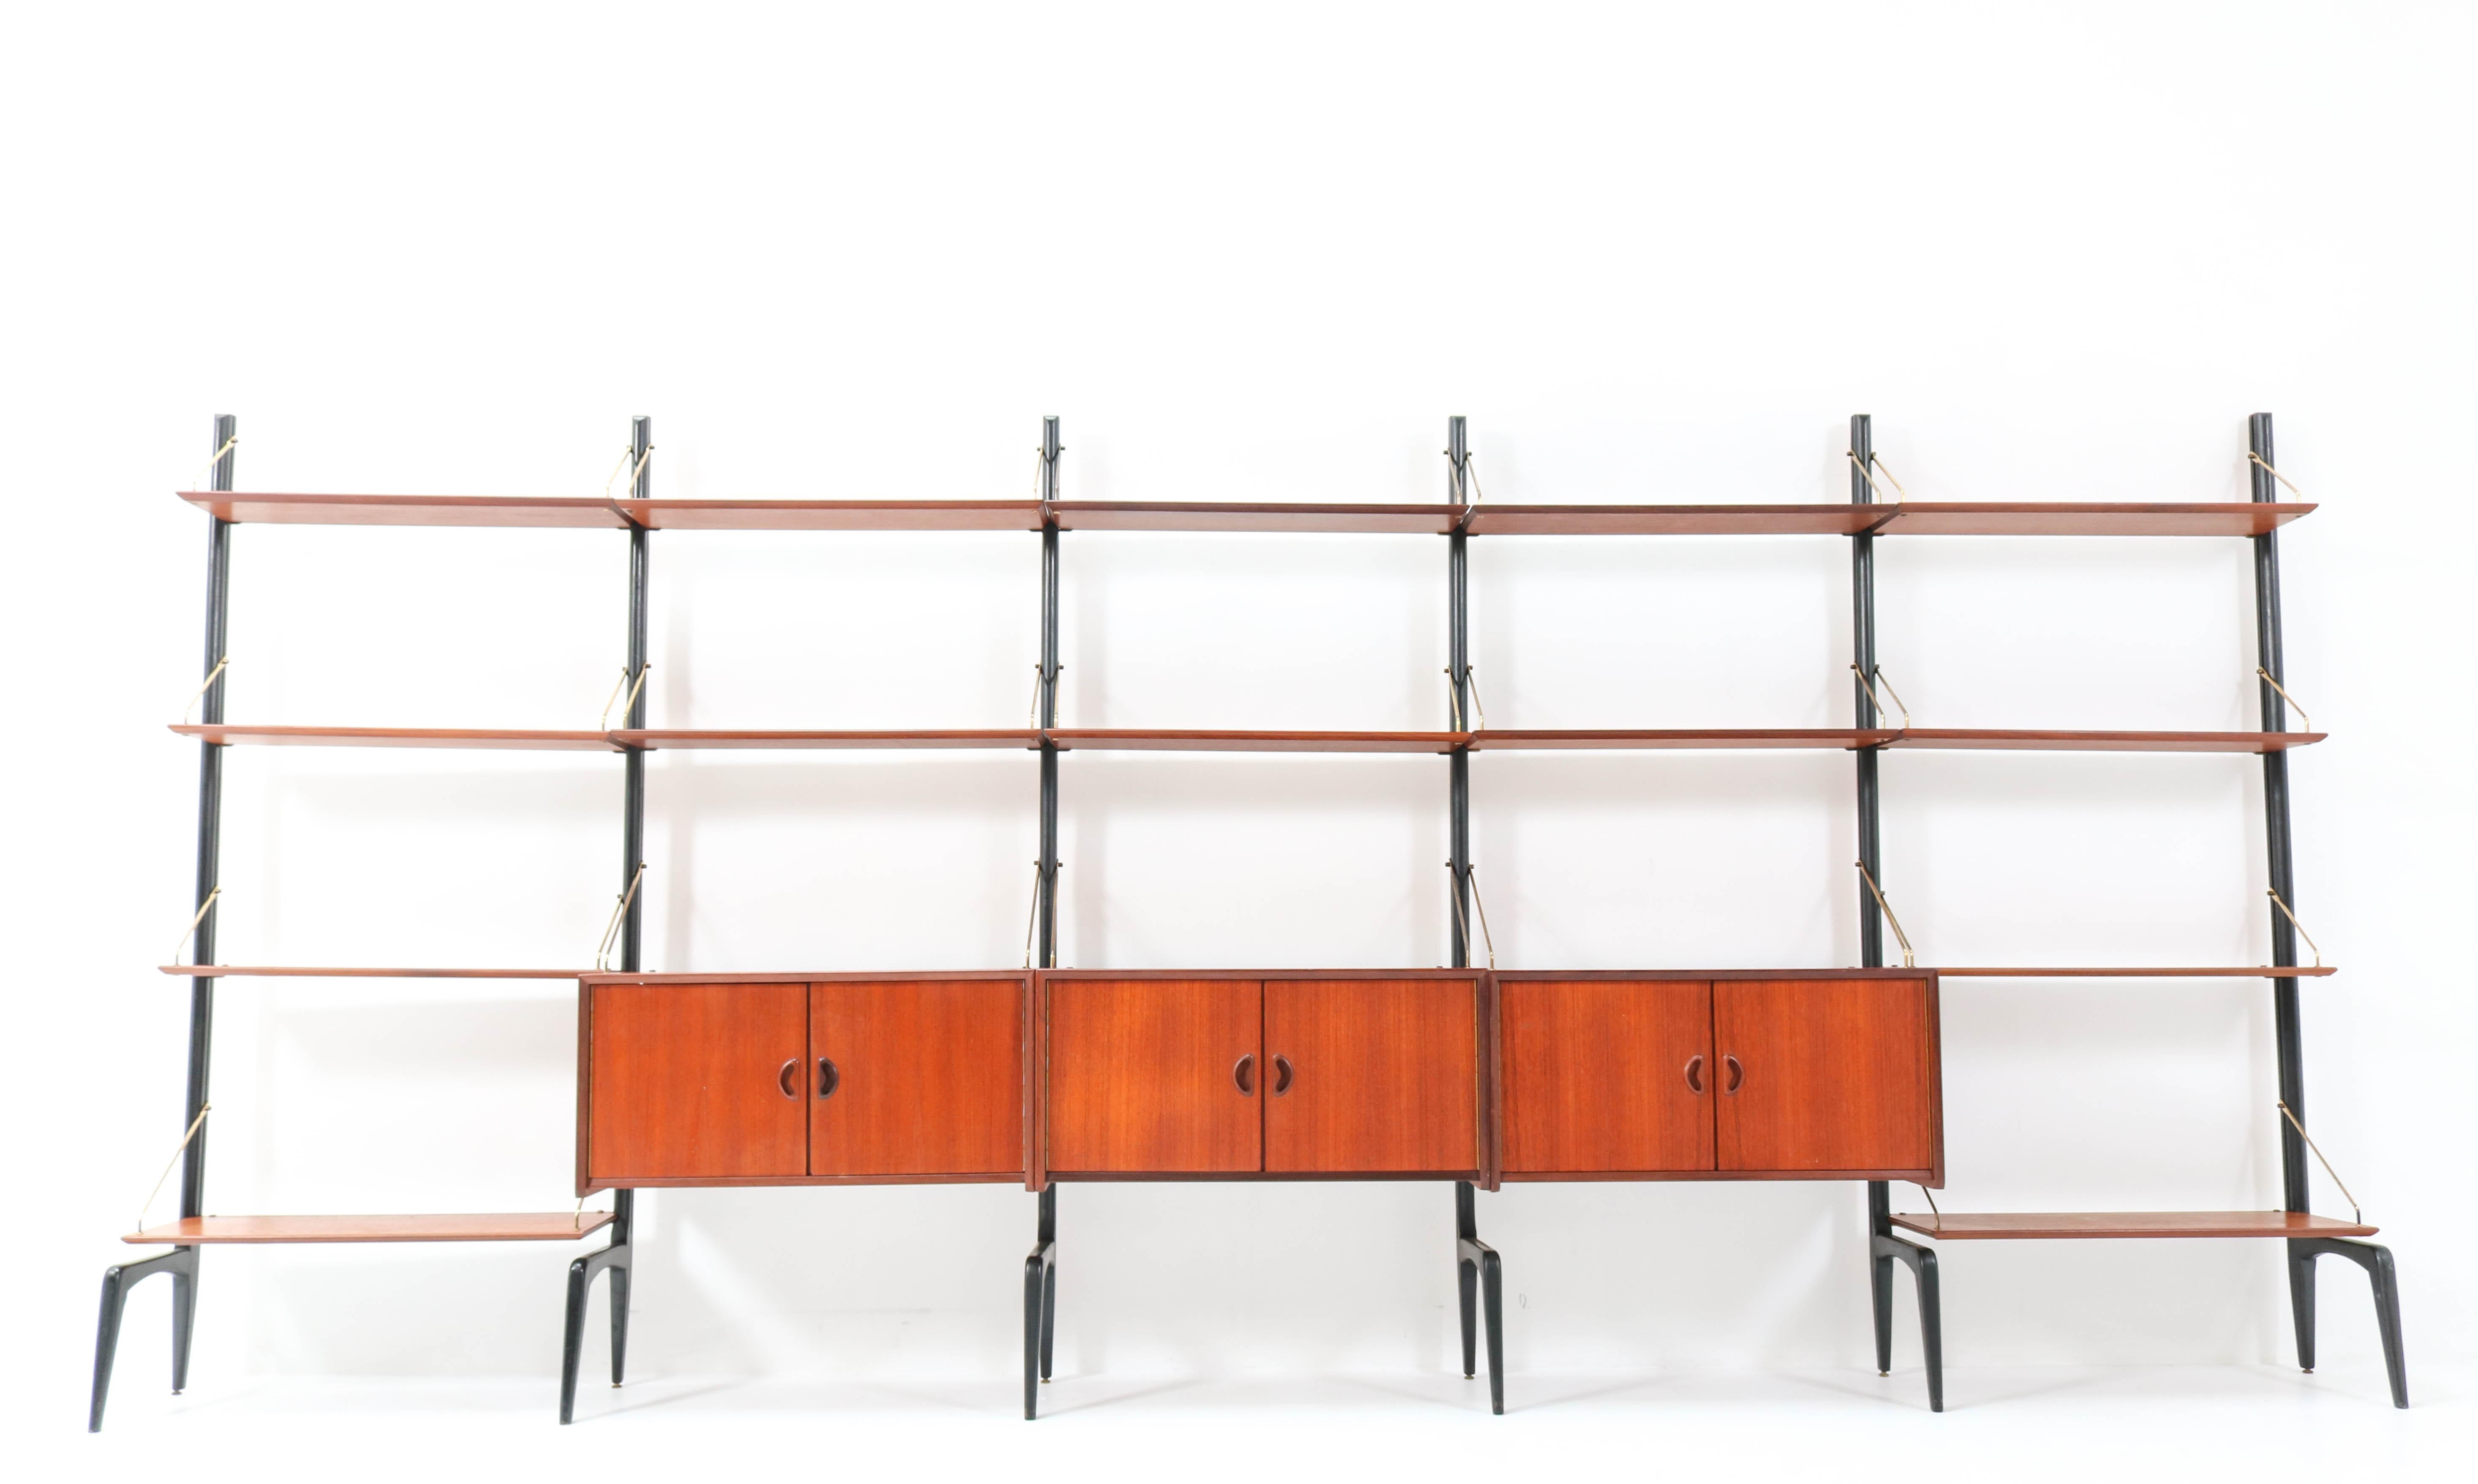 Magnificent and extra large Mid-Century Modern free standing modular wall unit.
Design by Louis Van Teeffelen for WéBé.
Striking Dutch design from the 1950s.
This wall unit consists of:
6 original black lacquered wooden uprights H: 200 cm or